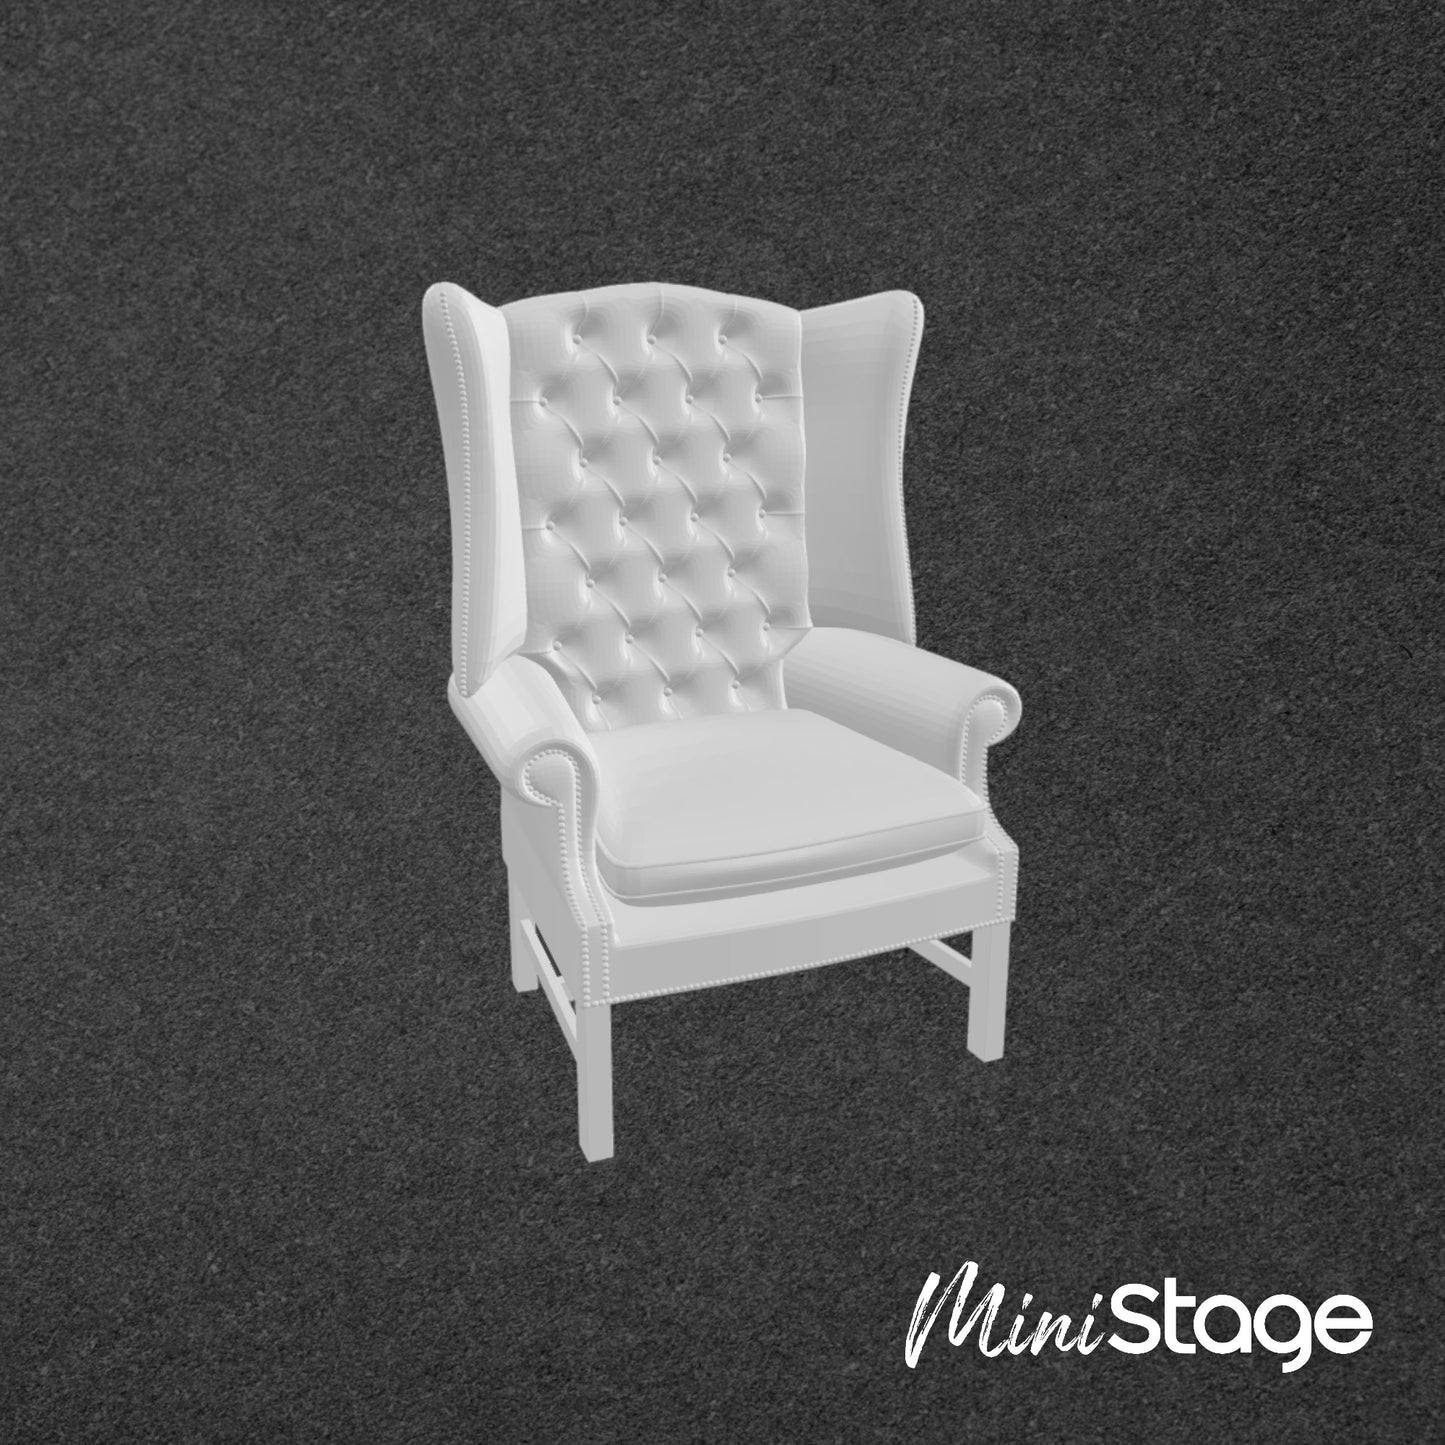 Scale Model of a Georgian Wing Armchair